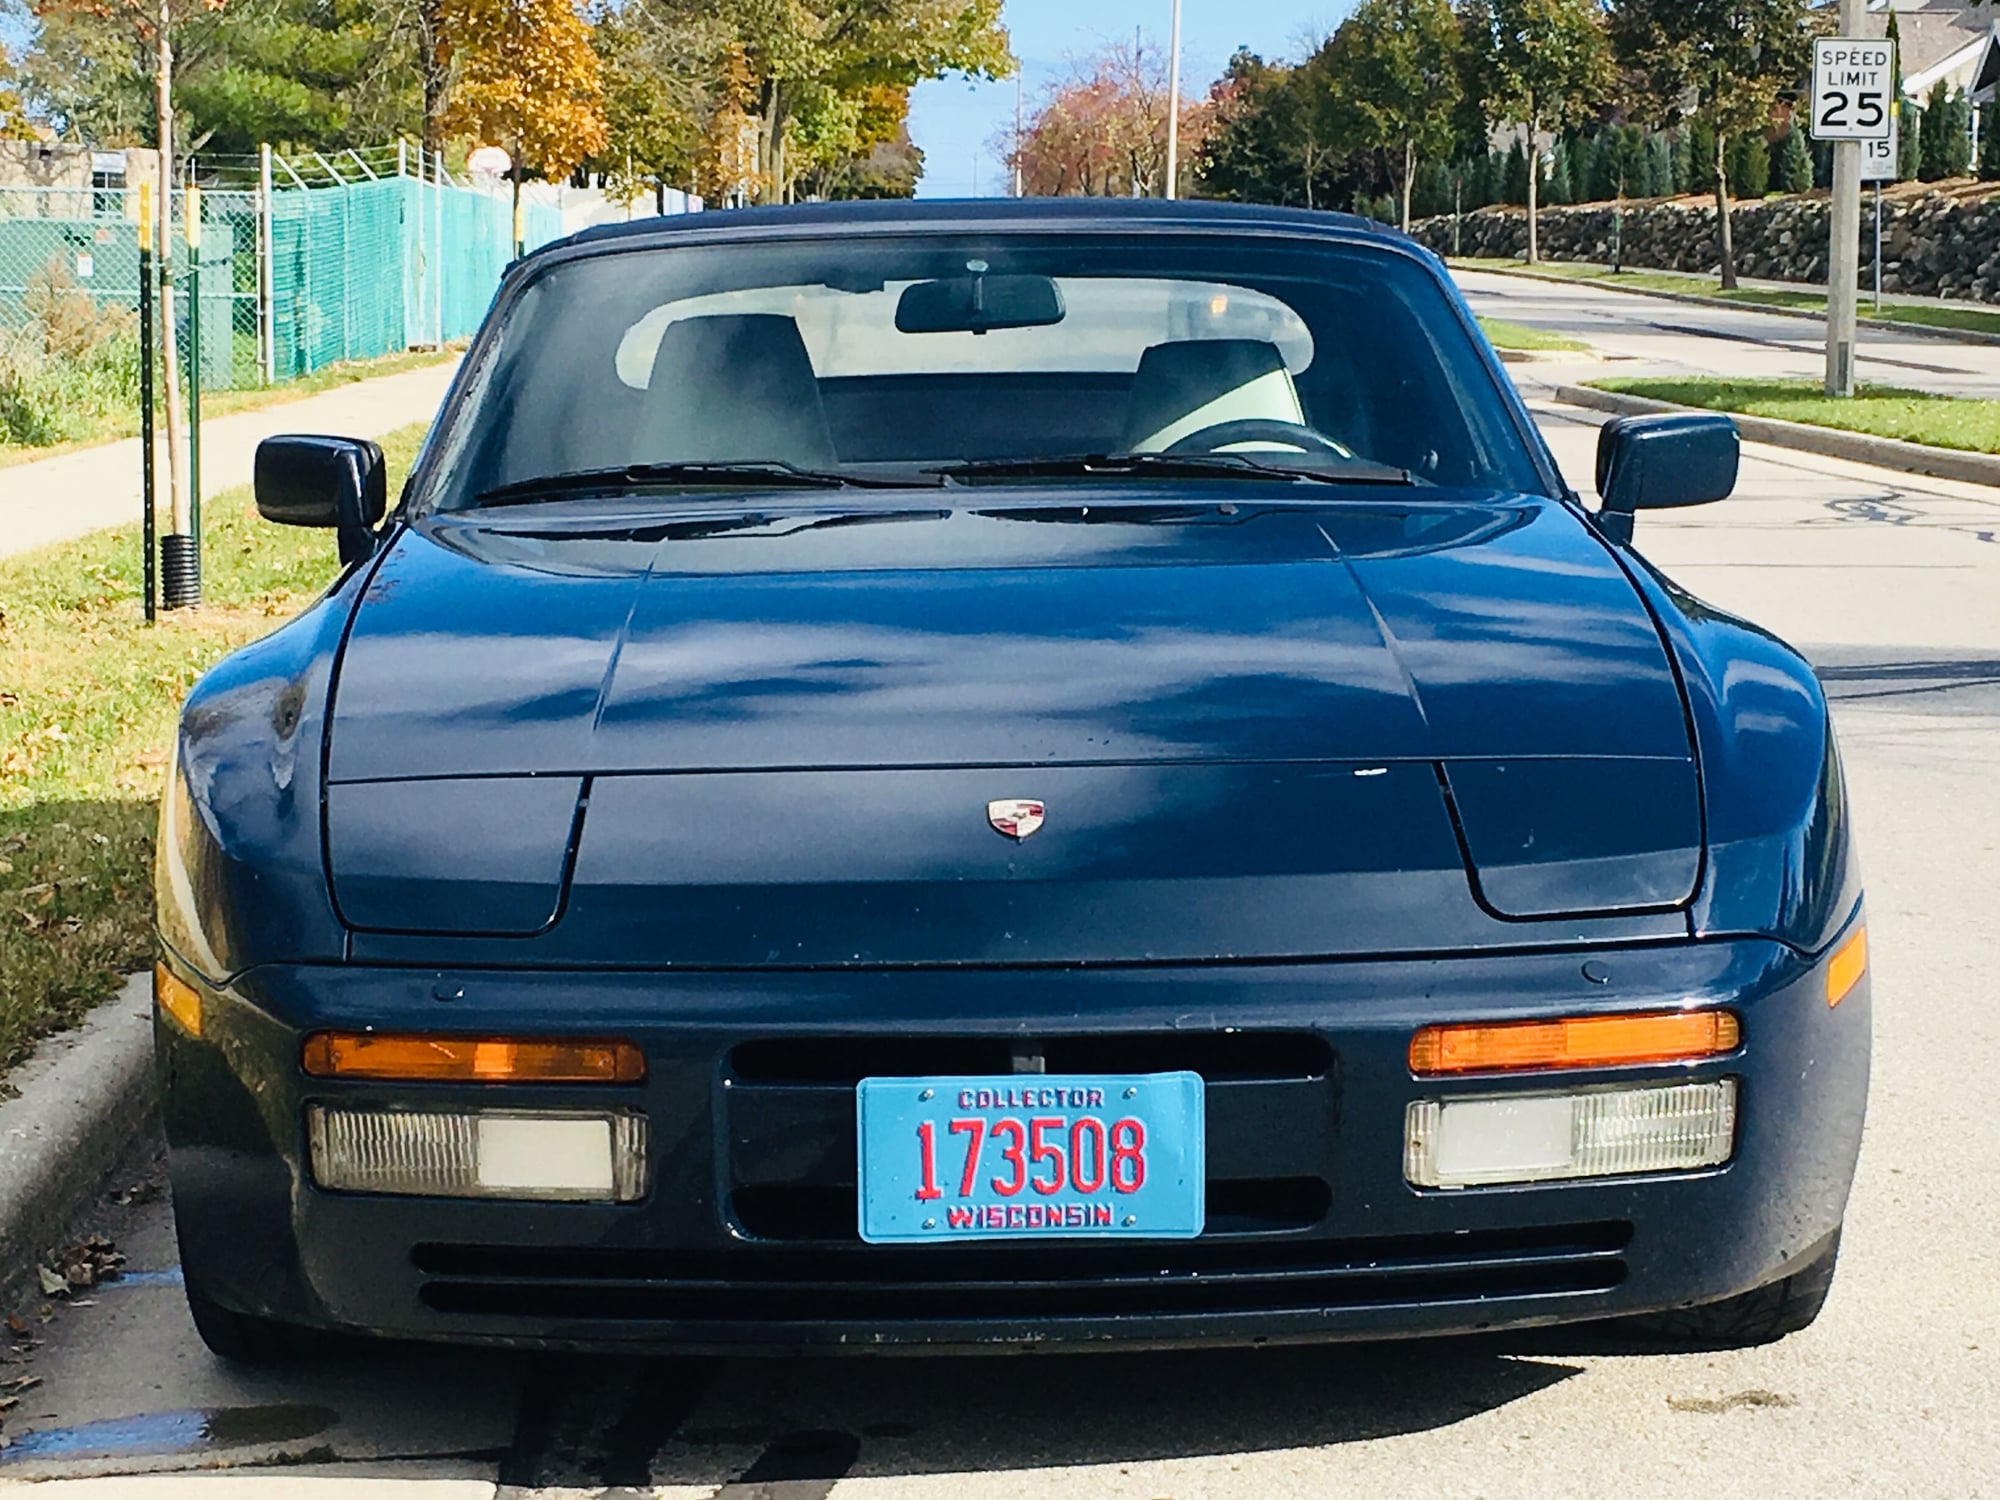 1990 Porsche 944 - Beautiful Blue 1990 944 S Cabriolet - Used - VIN WP0CB2945LN481623 - 150,523 Miles - 4 cyl - 2WD - Manual - Convertible - Blue - Milwaukee, WI 53217, United States